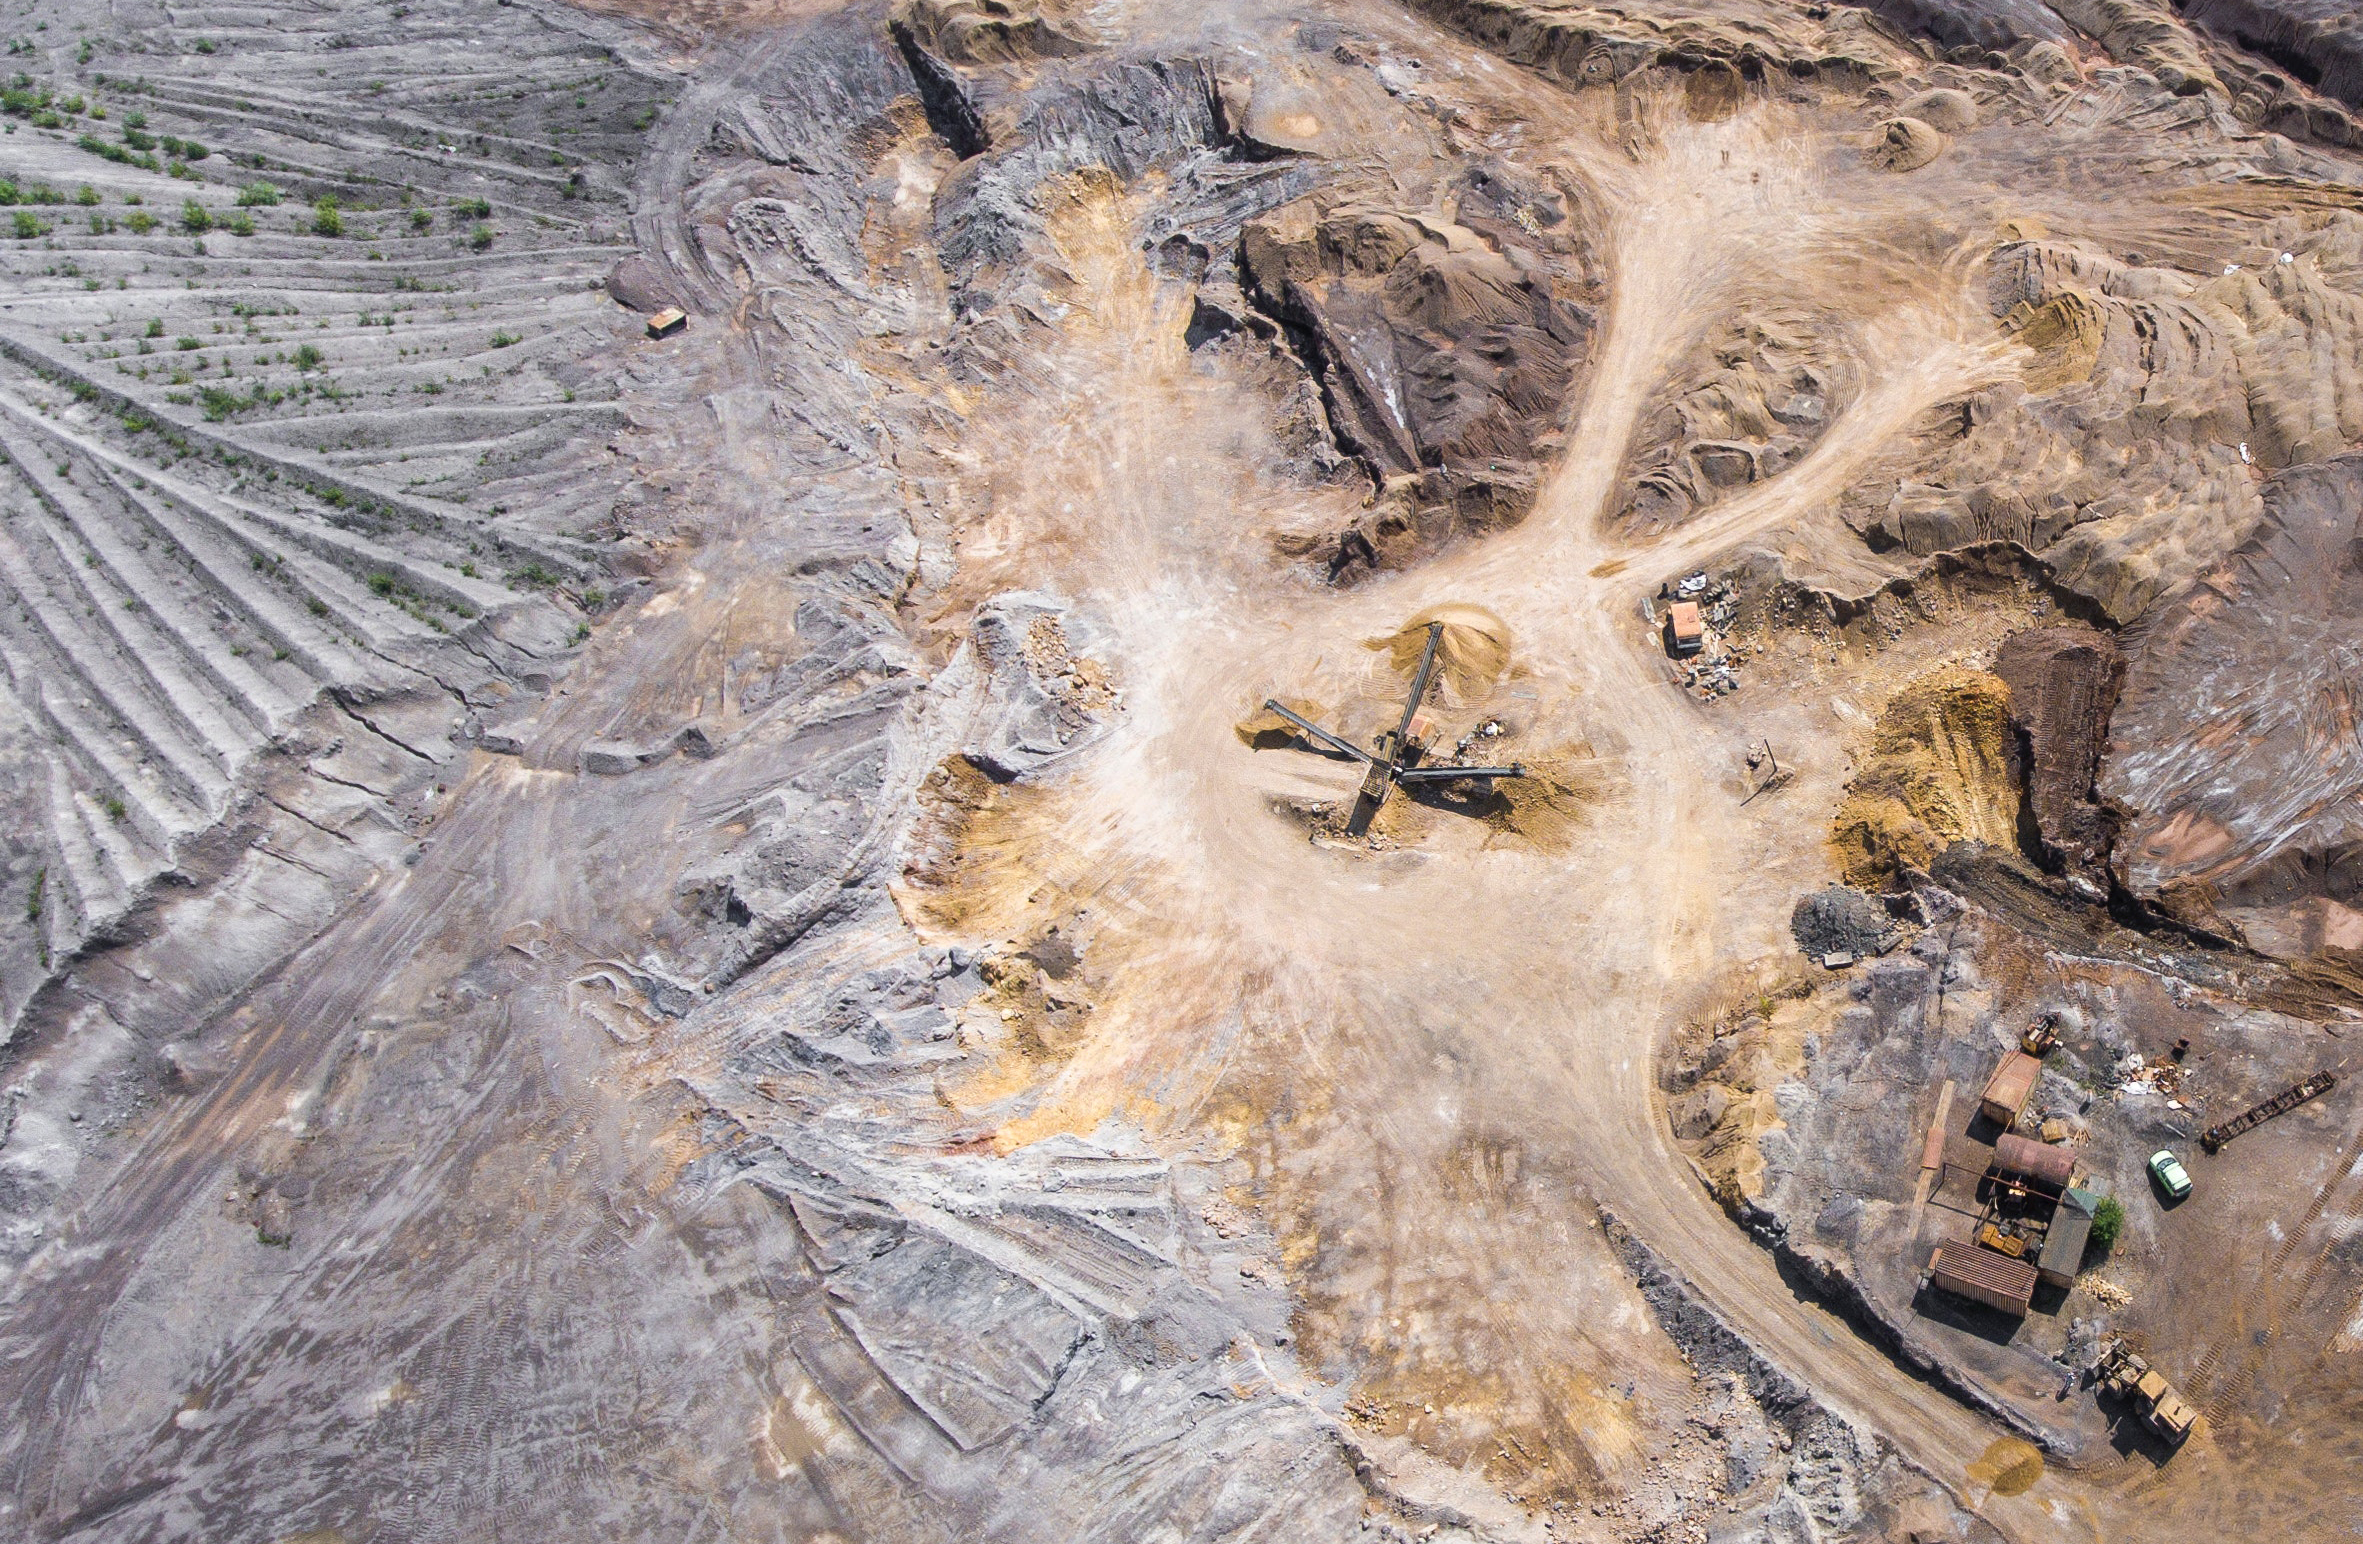 wide aerial shot of a quarry/mine with open fields next to it